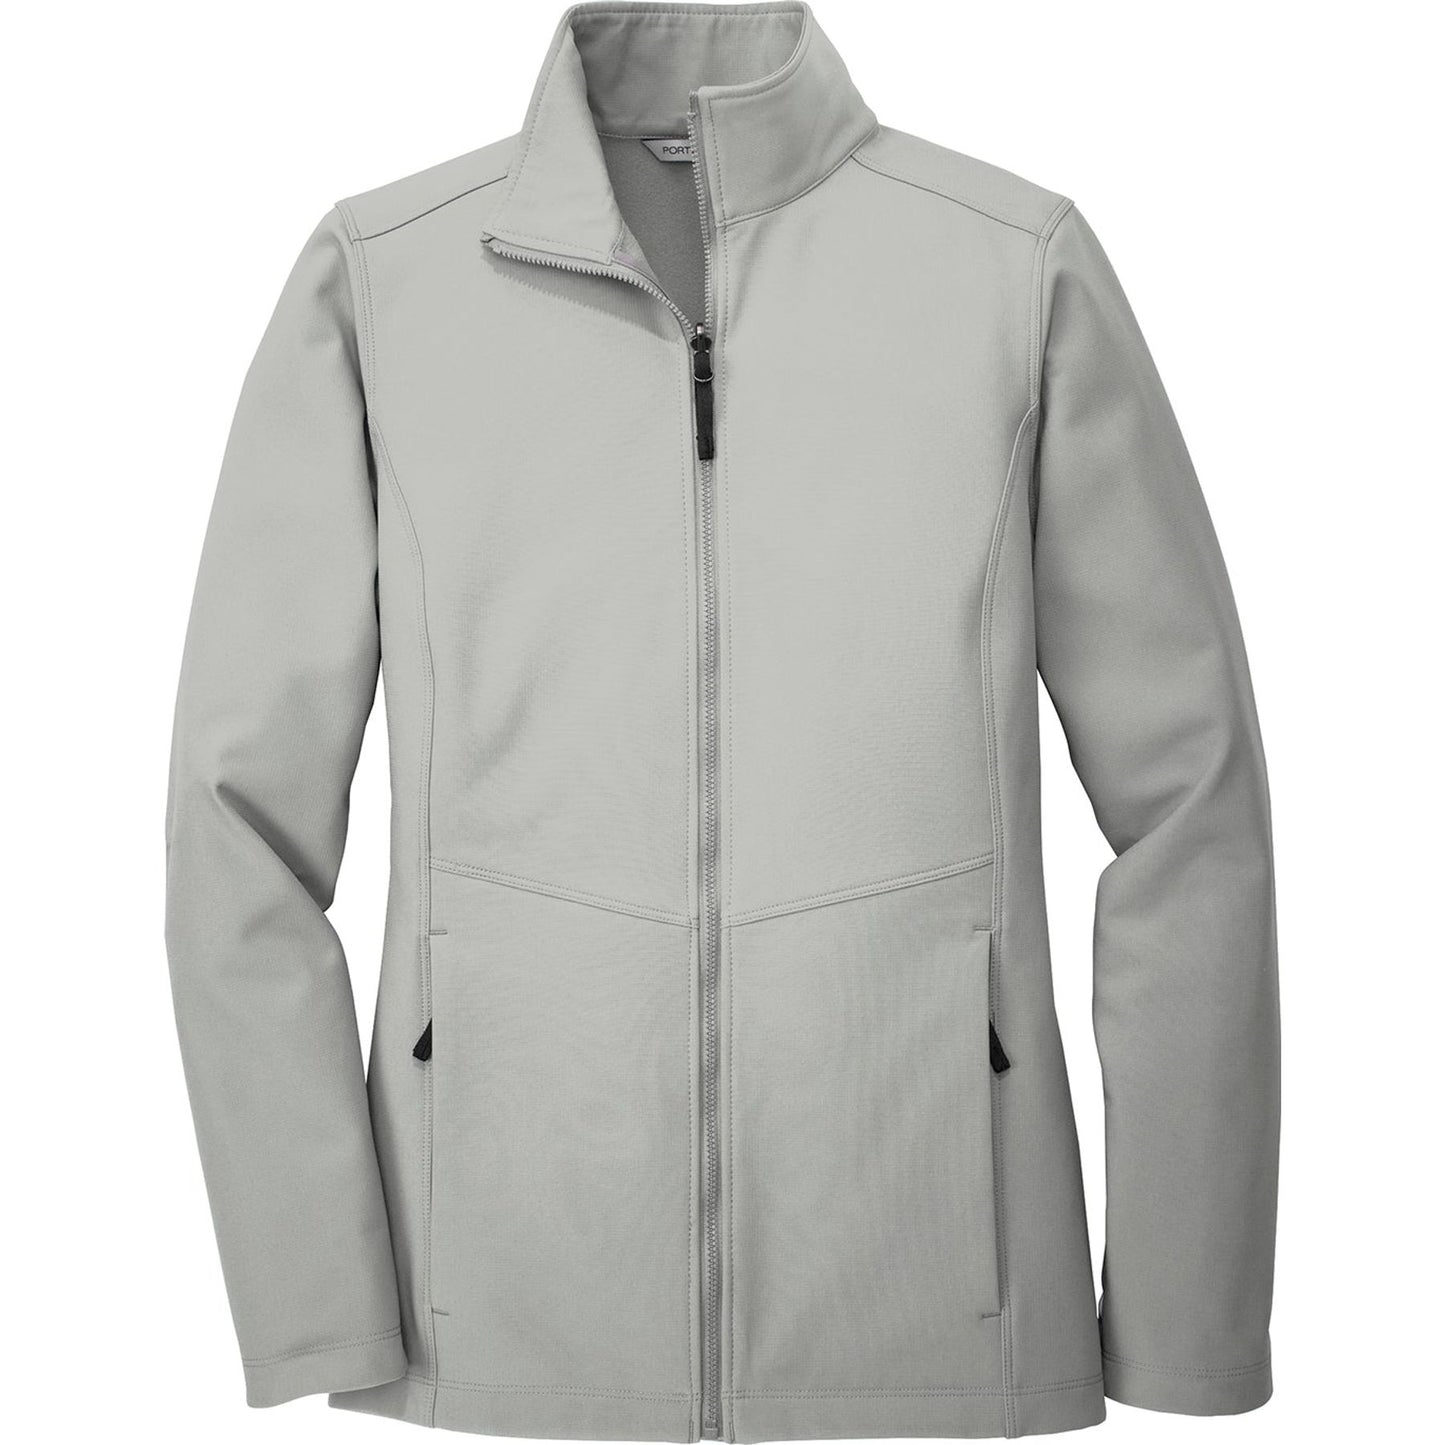 Port Authority® Ladies Collective Soft Shell Jacket